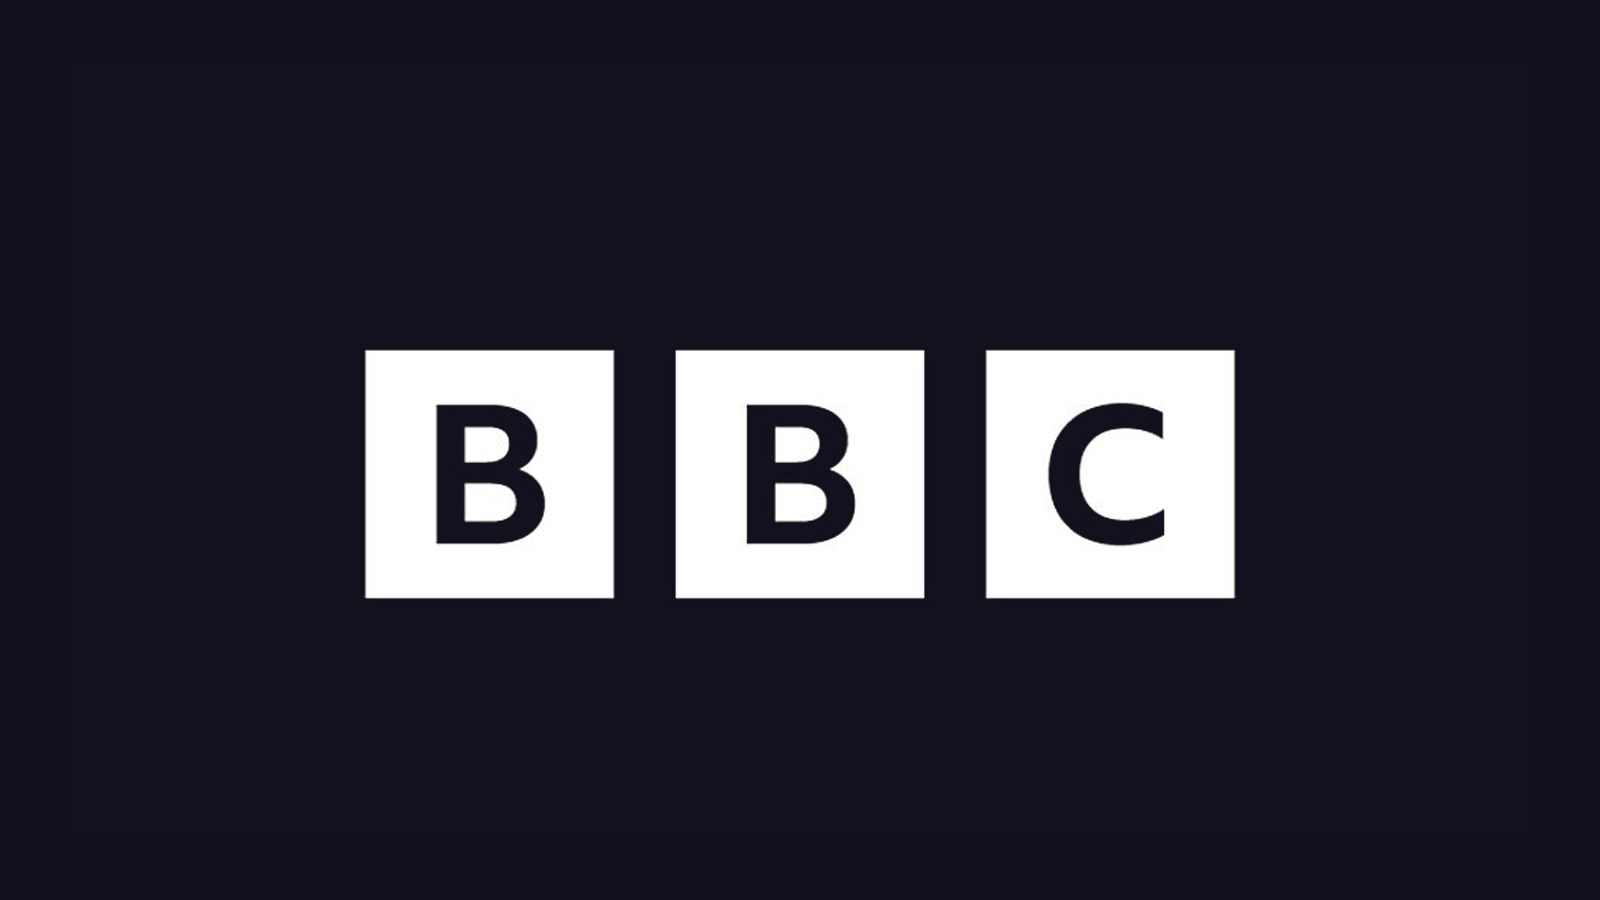 bbc.png